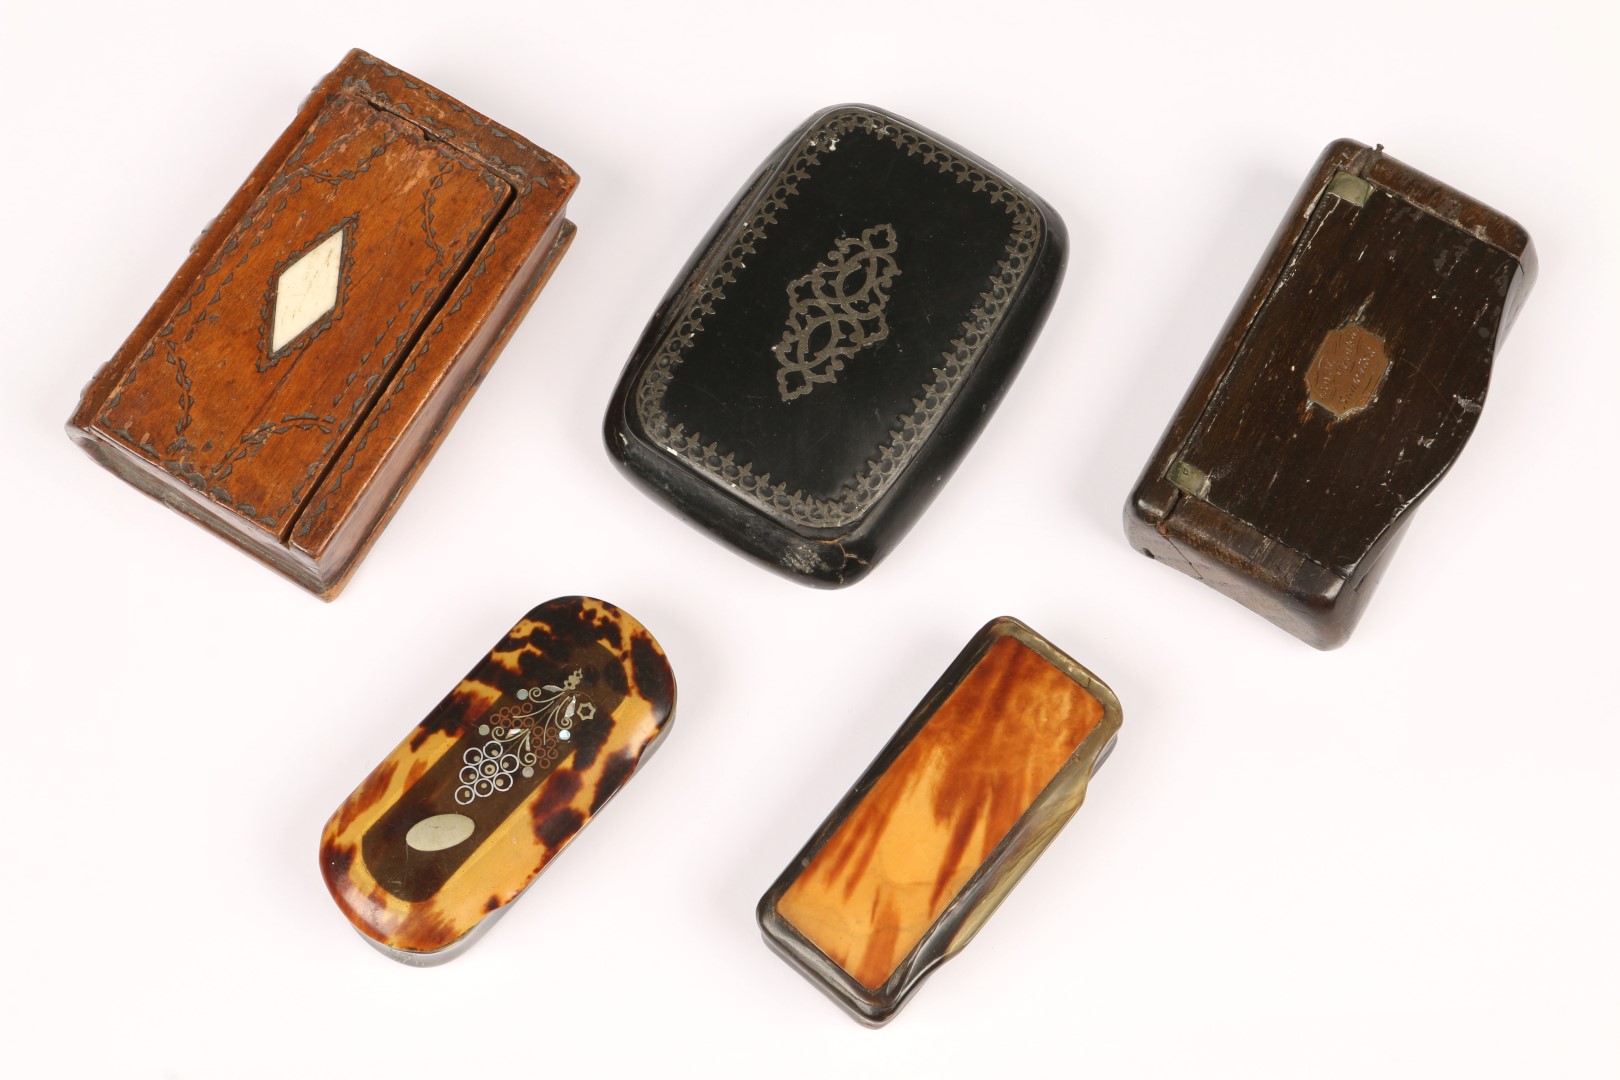 TWO HORN AND TORTOISESHELL SNUFF BOXES, one with inlaid flowers; one wooden snuff box in book form